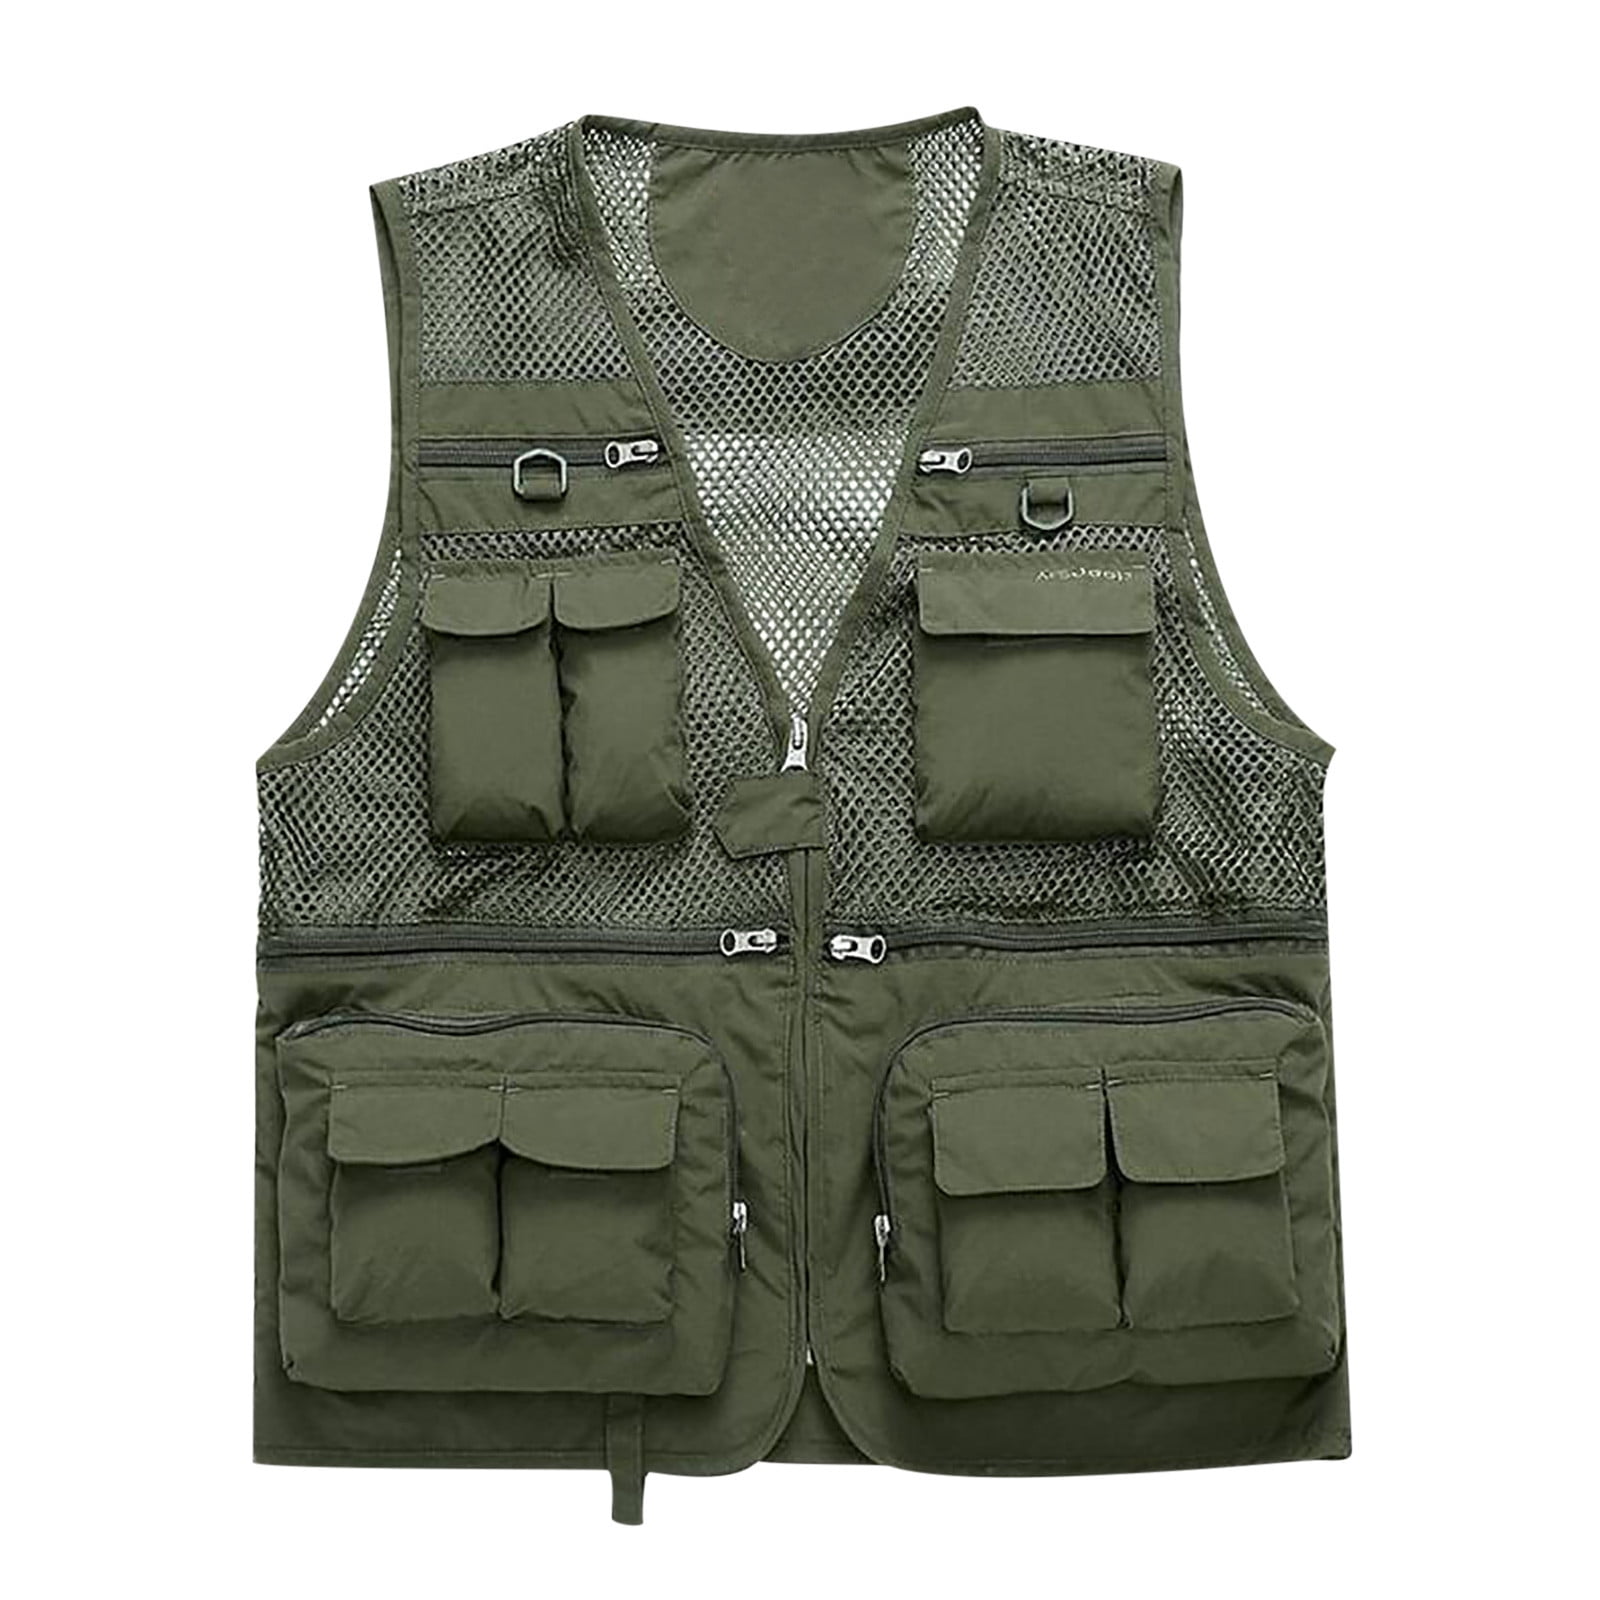 Mens Tactical Fishing And Safari Work Jackets For Men With Multi Pockets  Sleeveless Travel Work Jackets For Men In 5XL, 6XL Or 7XL Sizes 7898m266s  From Yncwe, $29.92